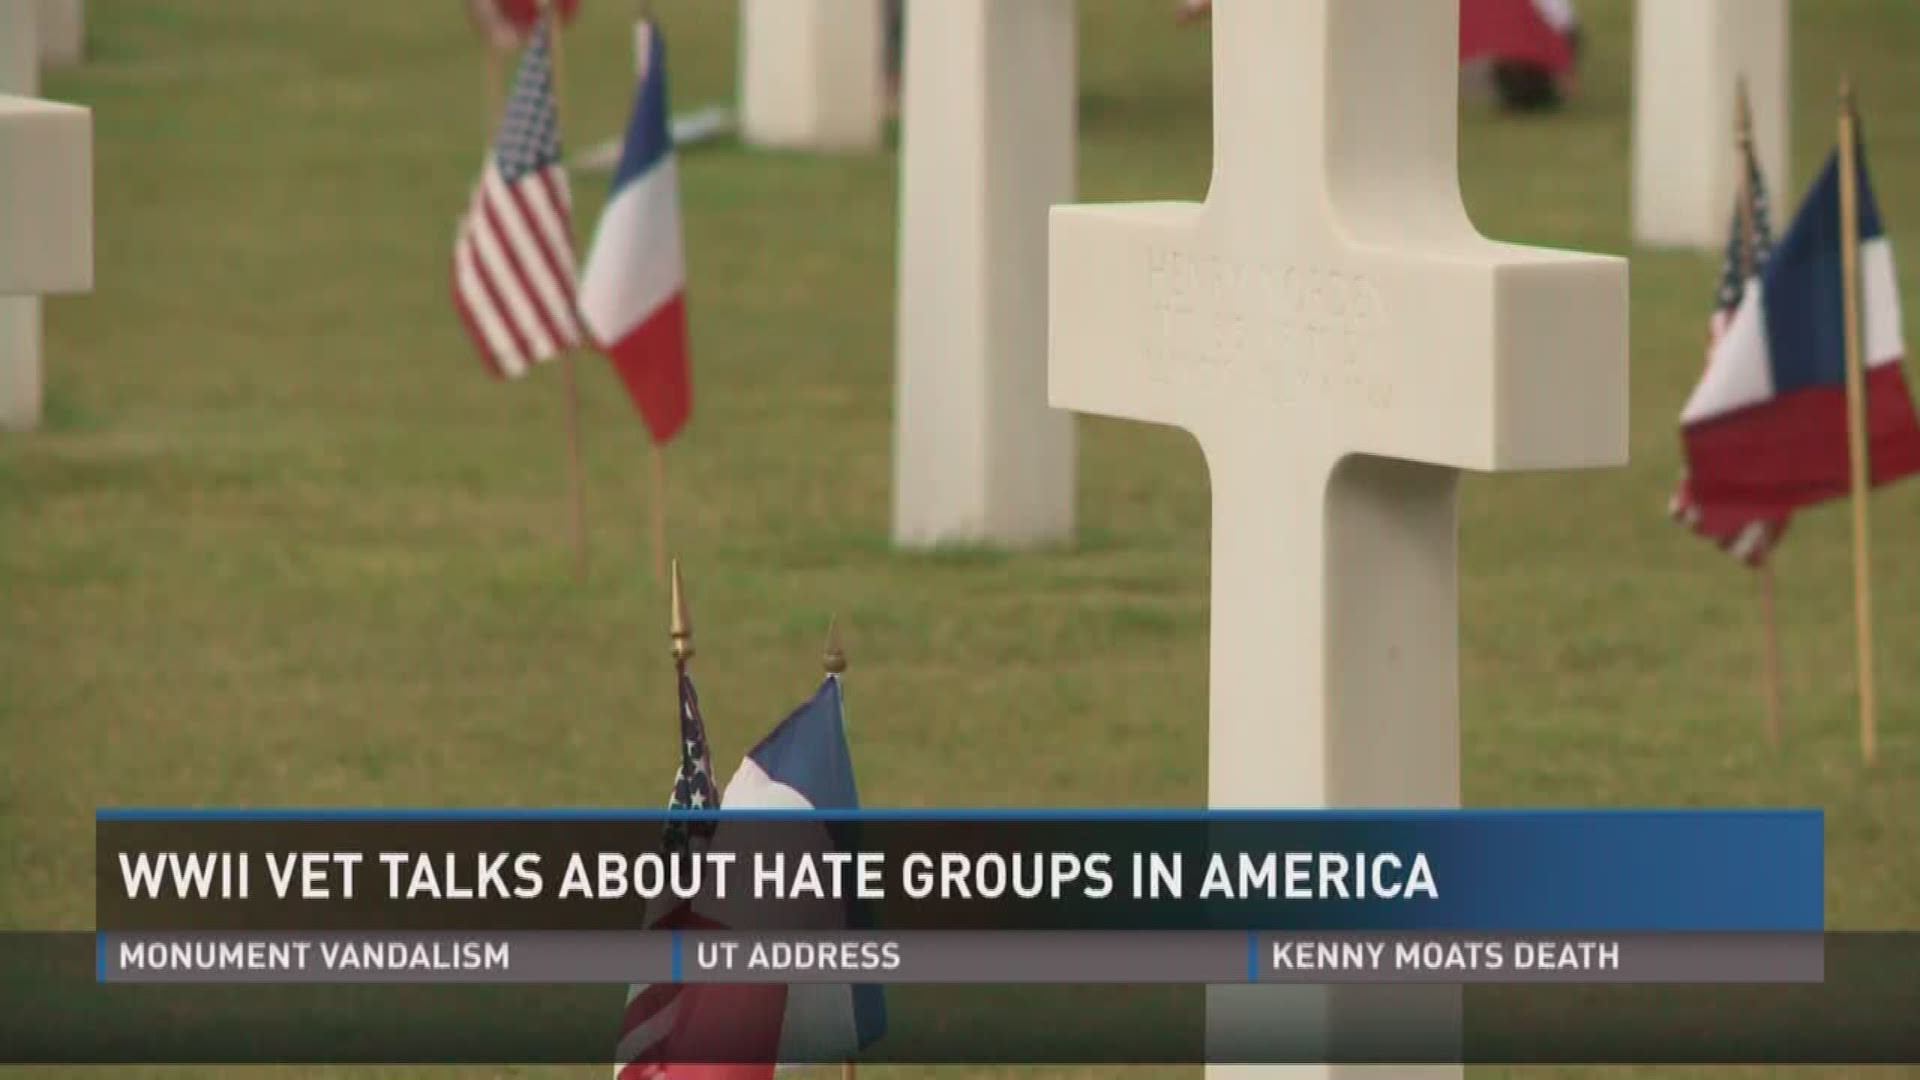 Aug. 24, 2017: A World War II veteran  is speaking out about the hate that's growing in America.